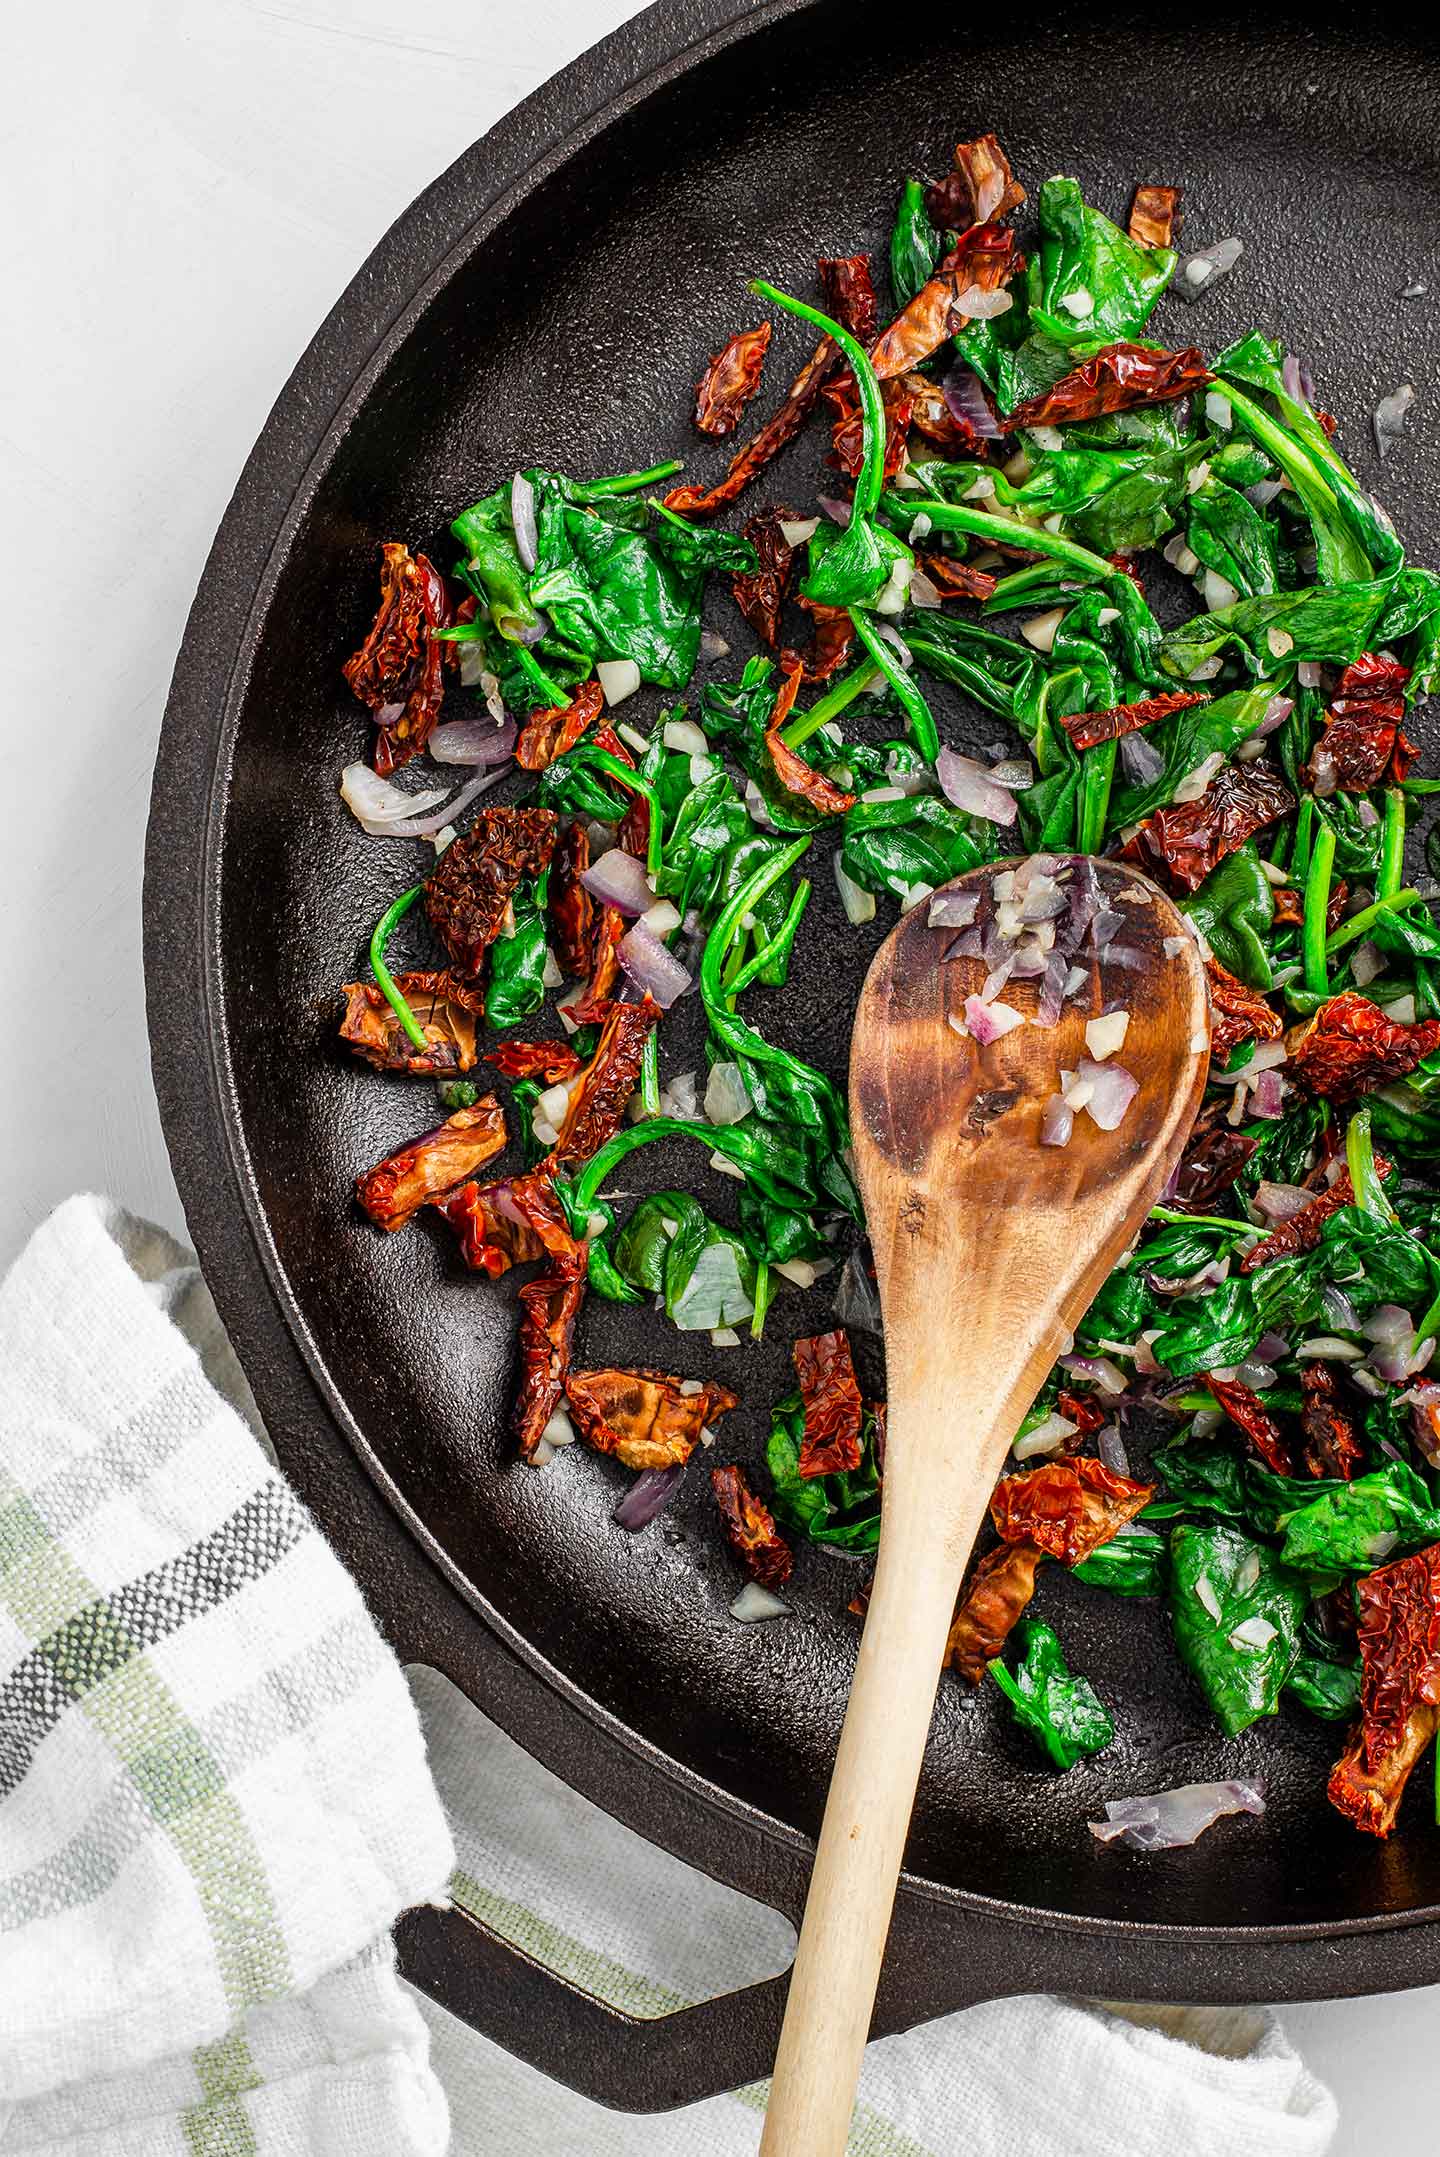 Top down view of sun-dried tomatoes, wilted spinach, cooked onion, and garlic in a cast iron skillet with a wooden spoon.